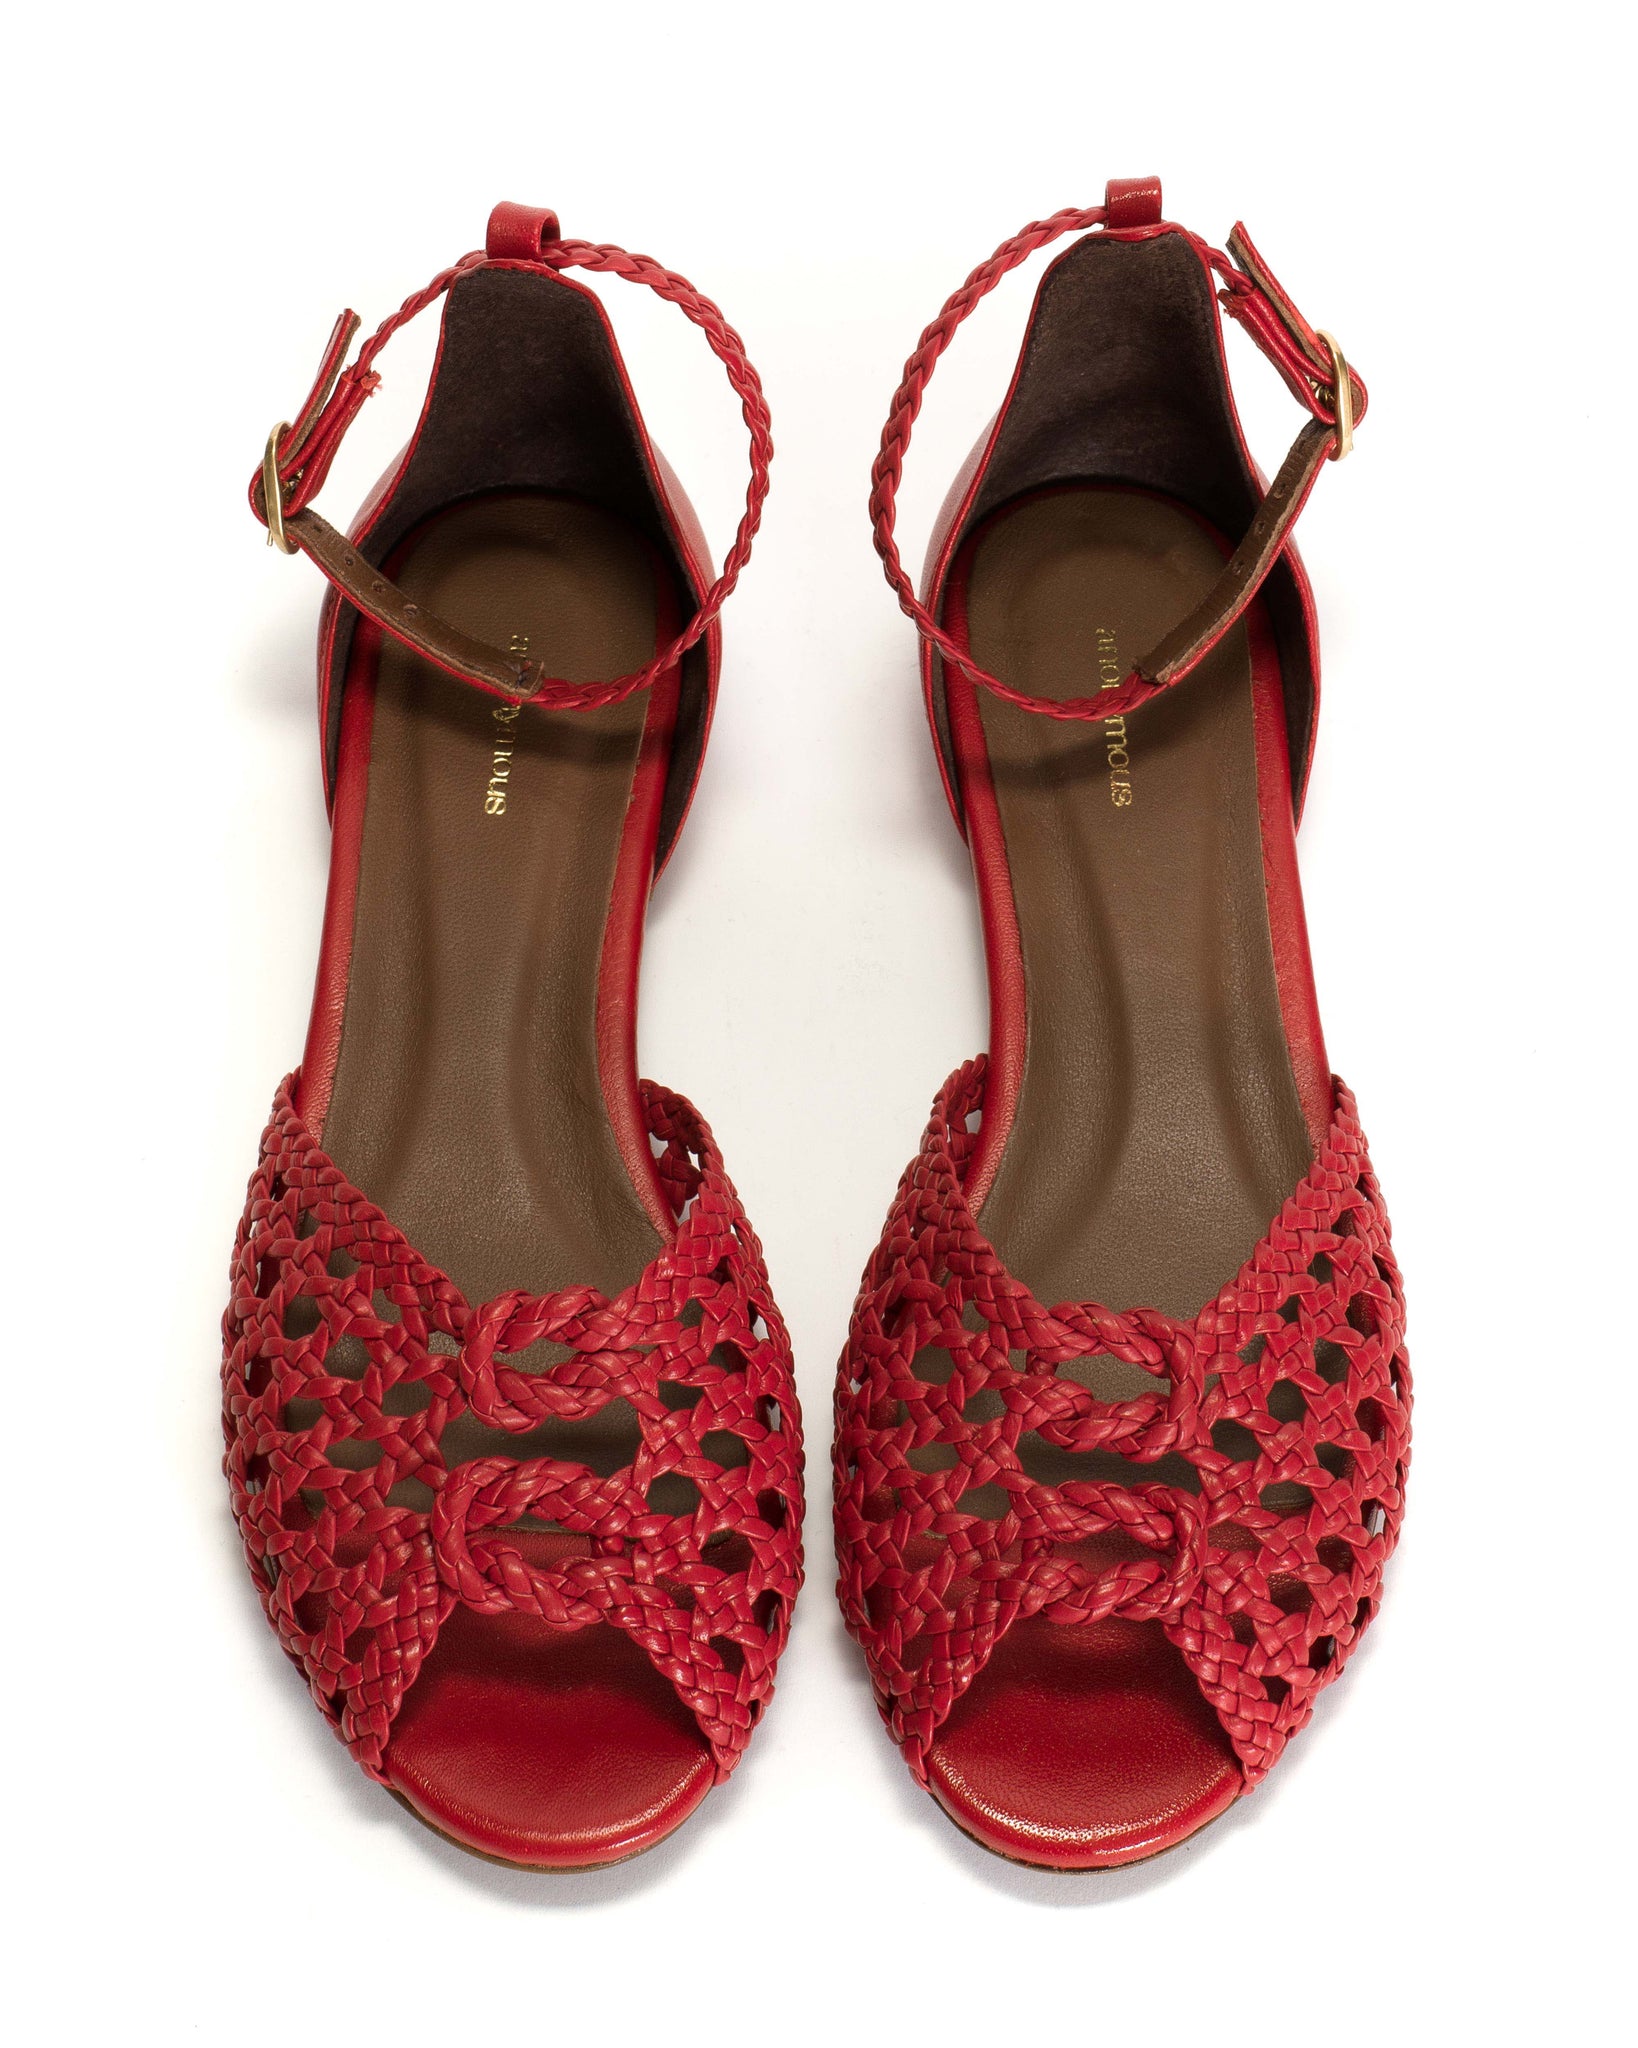 Lucy 10 Hand-braided leather Ruby red